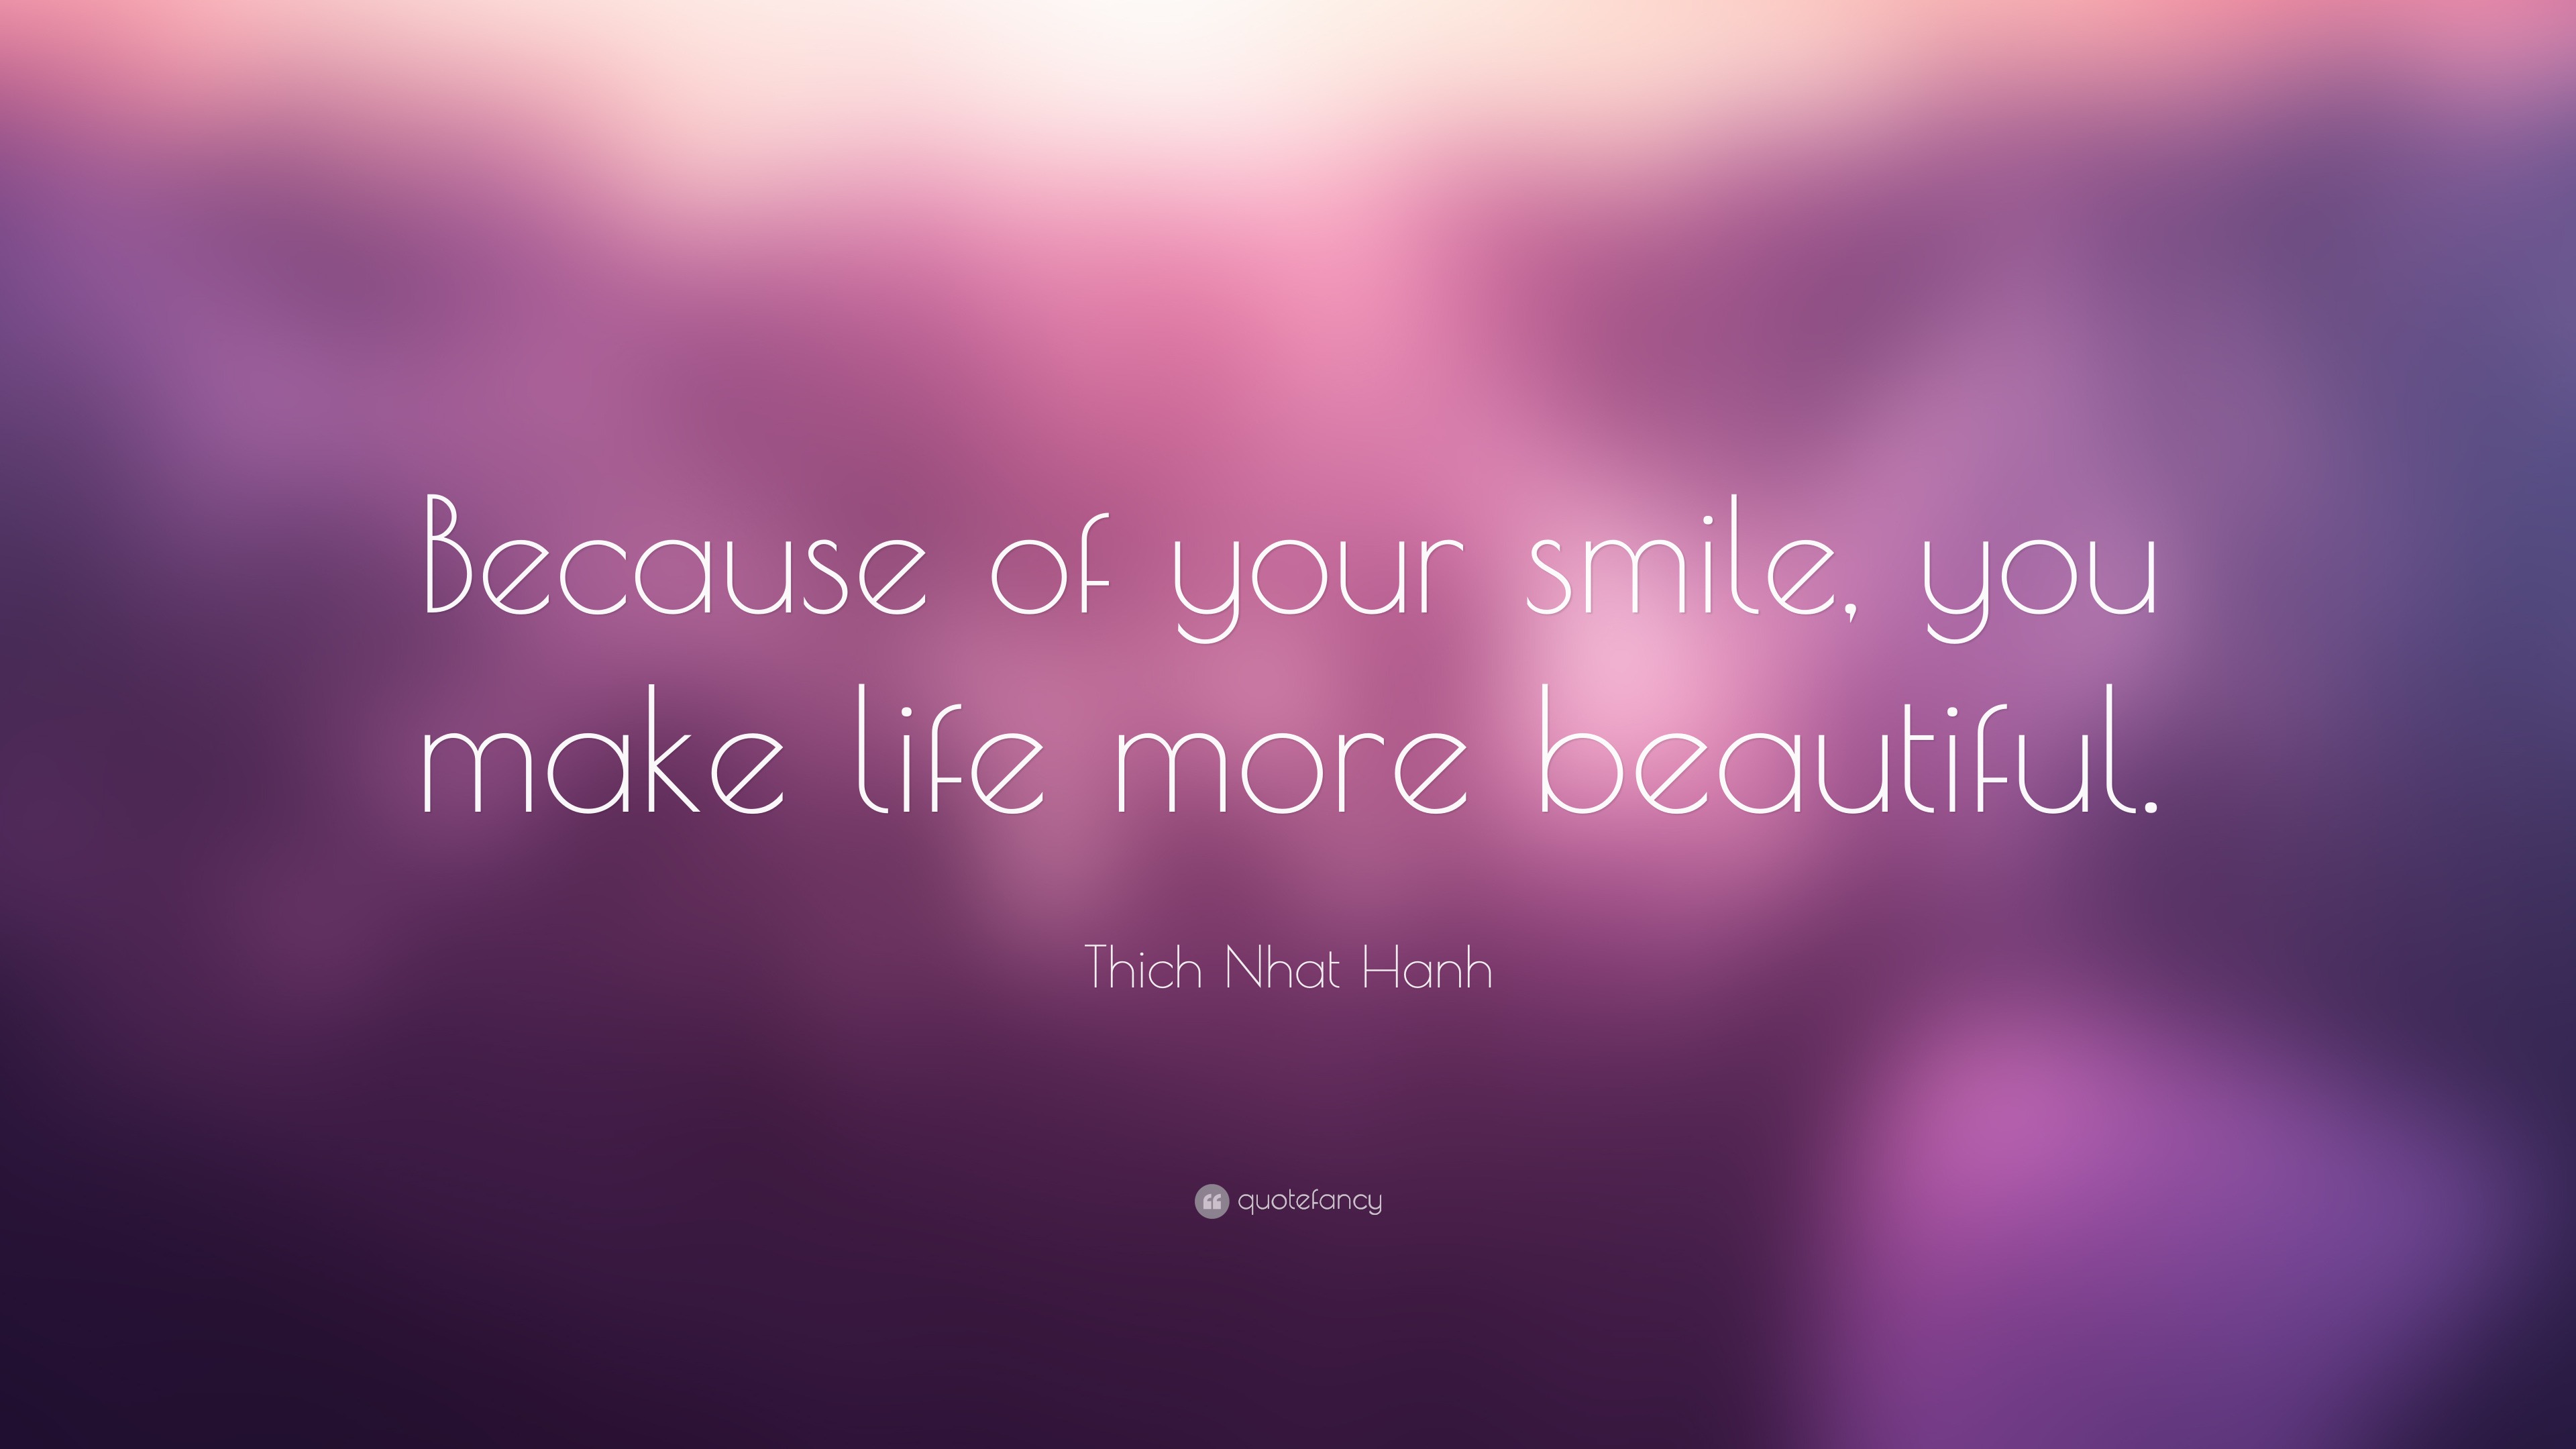 2053733 Thich Nhat Hanh Quote Because of your smile you make life more